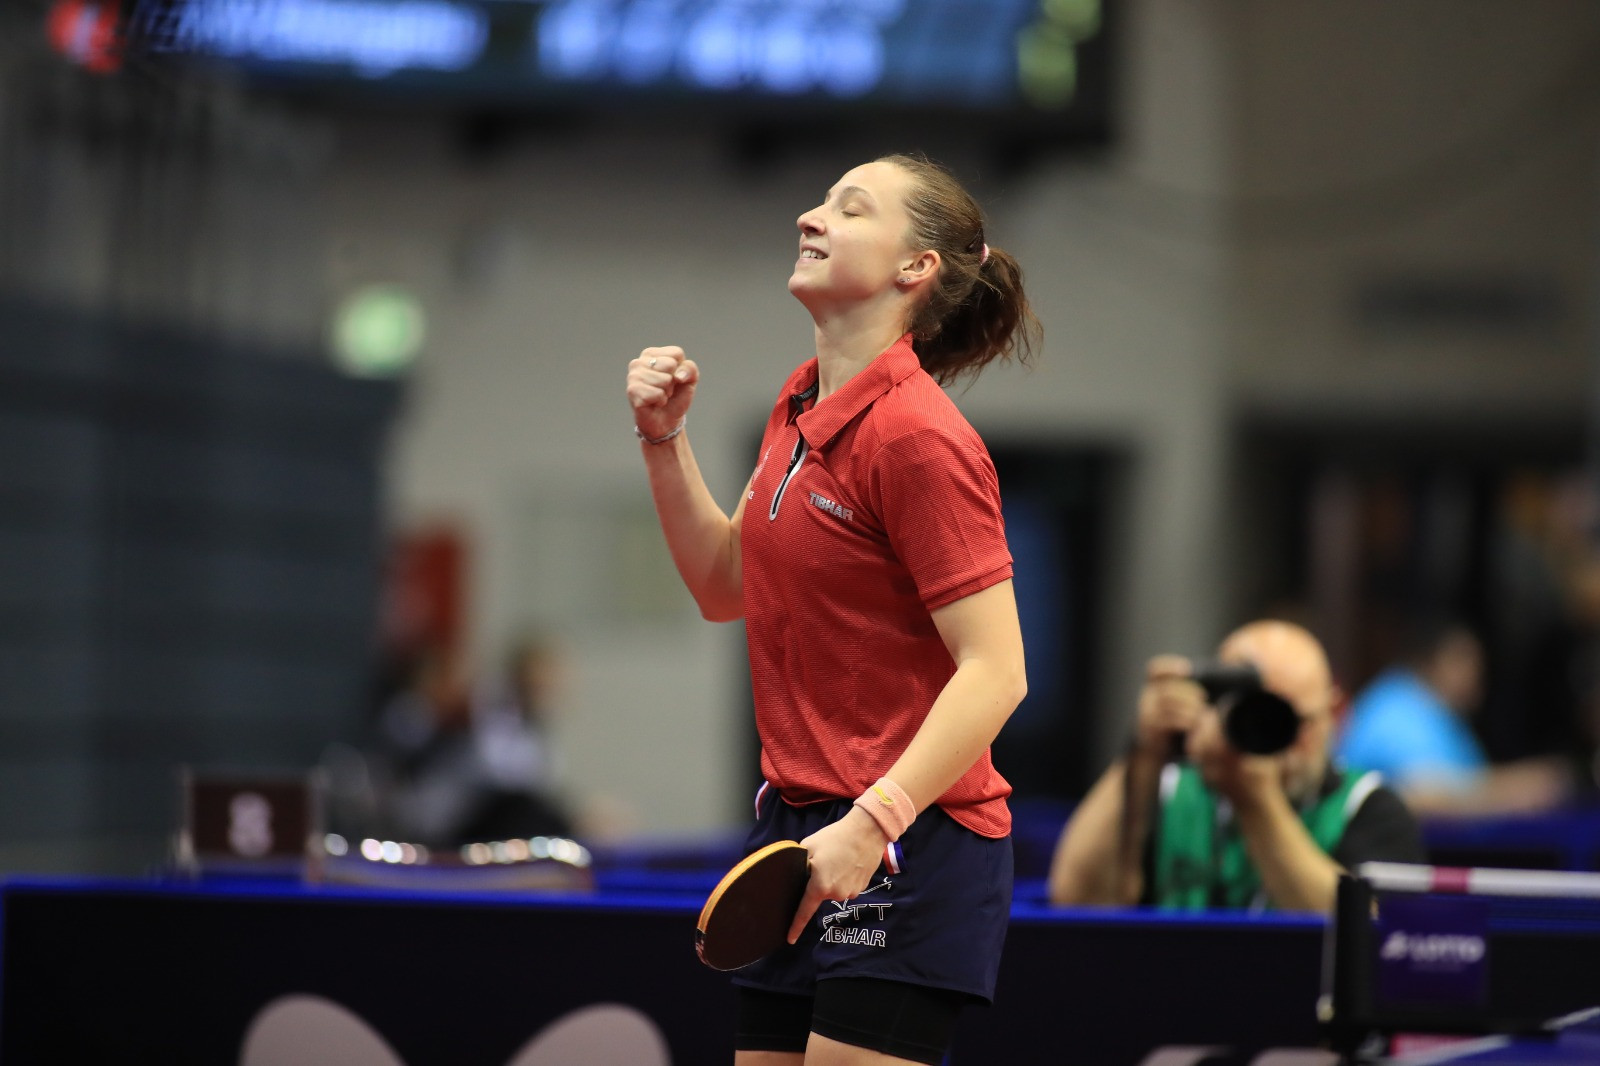 Stephanie Loeuillette of France defeated the world number 19, Bernadette Szocs of Romania, at the ITTF German Open ©ITTF